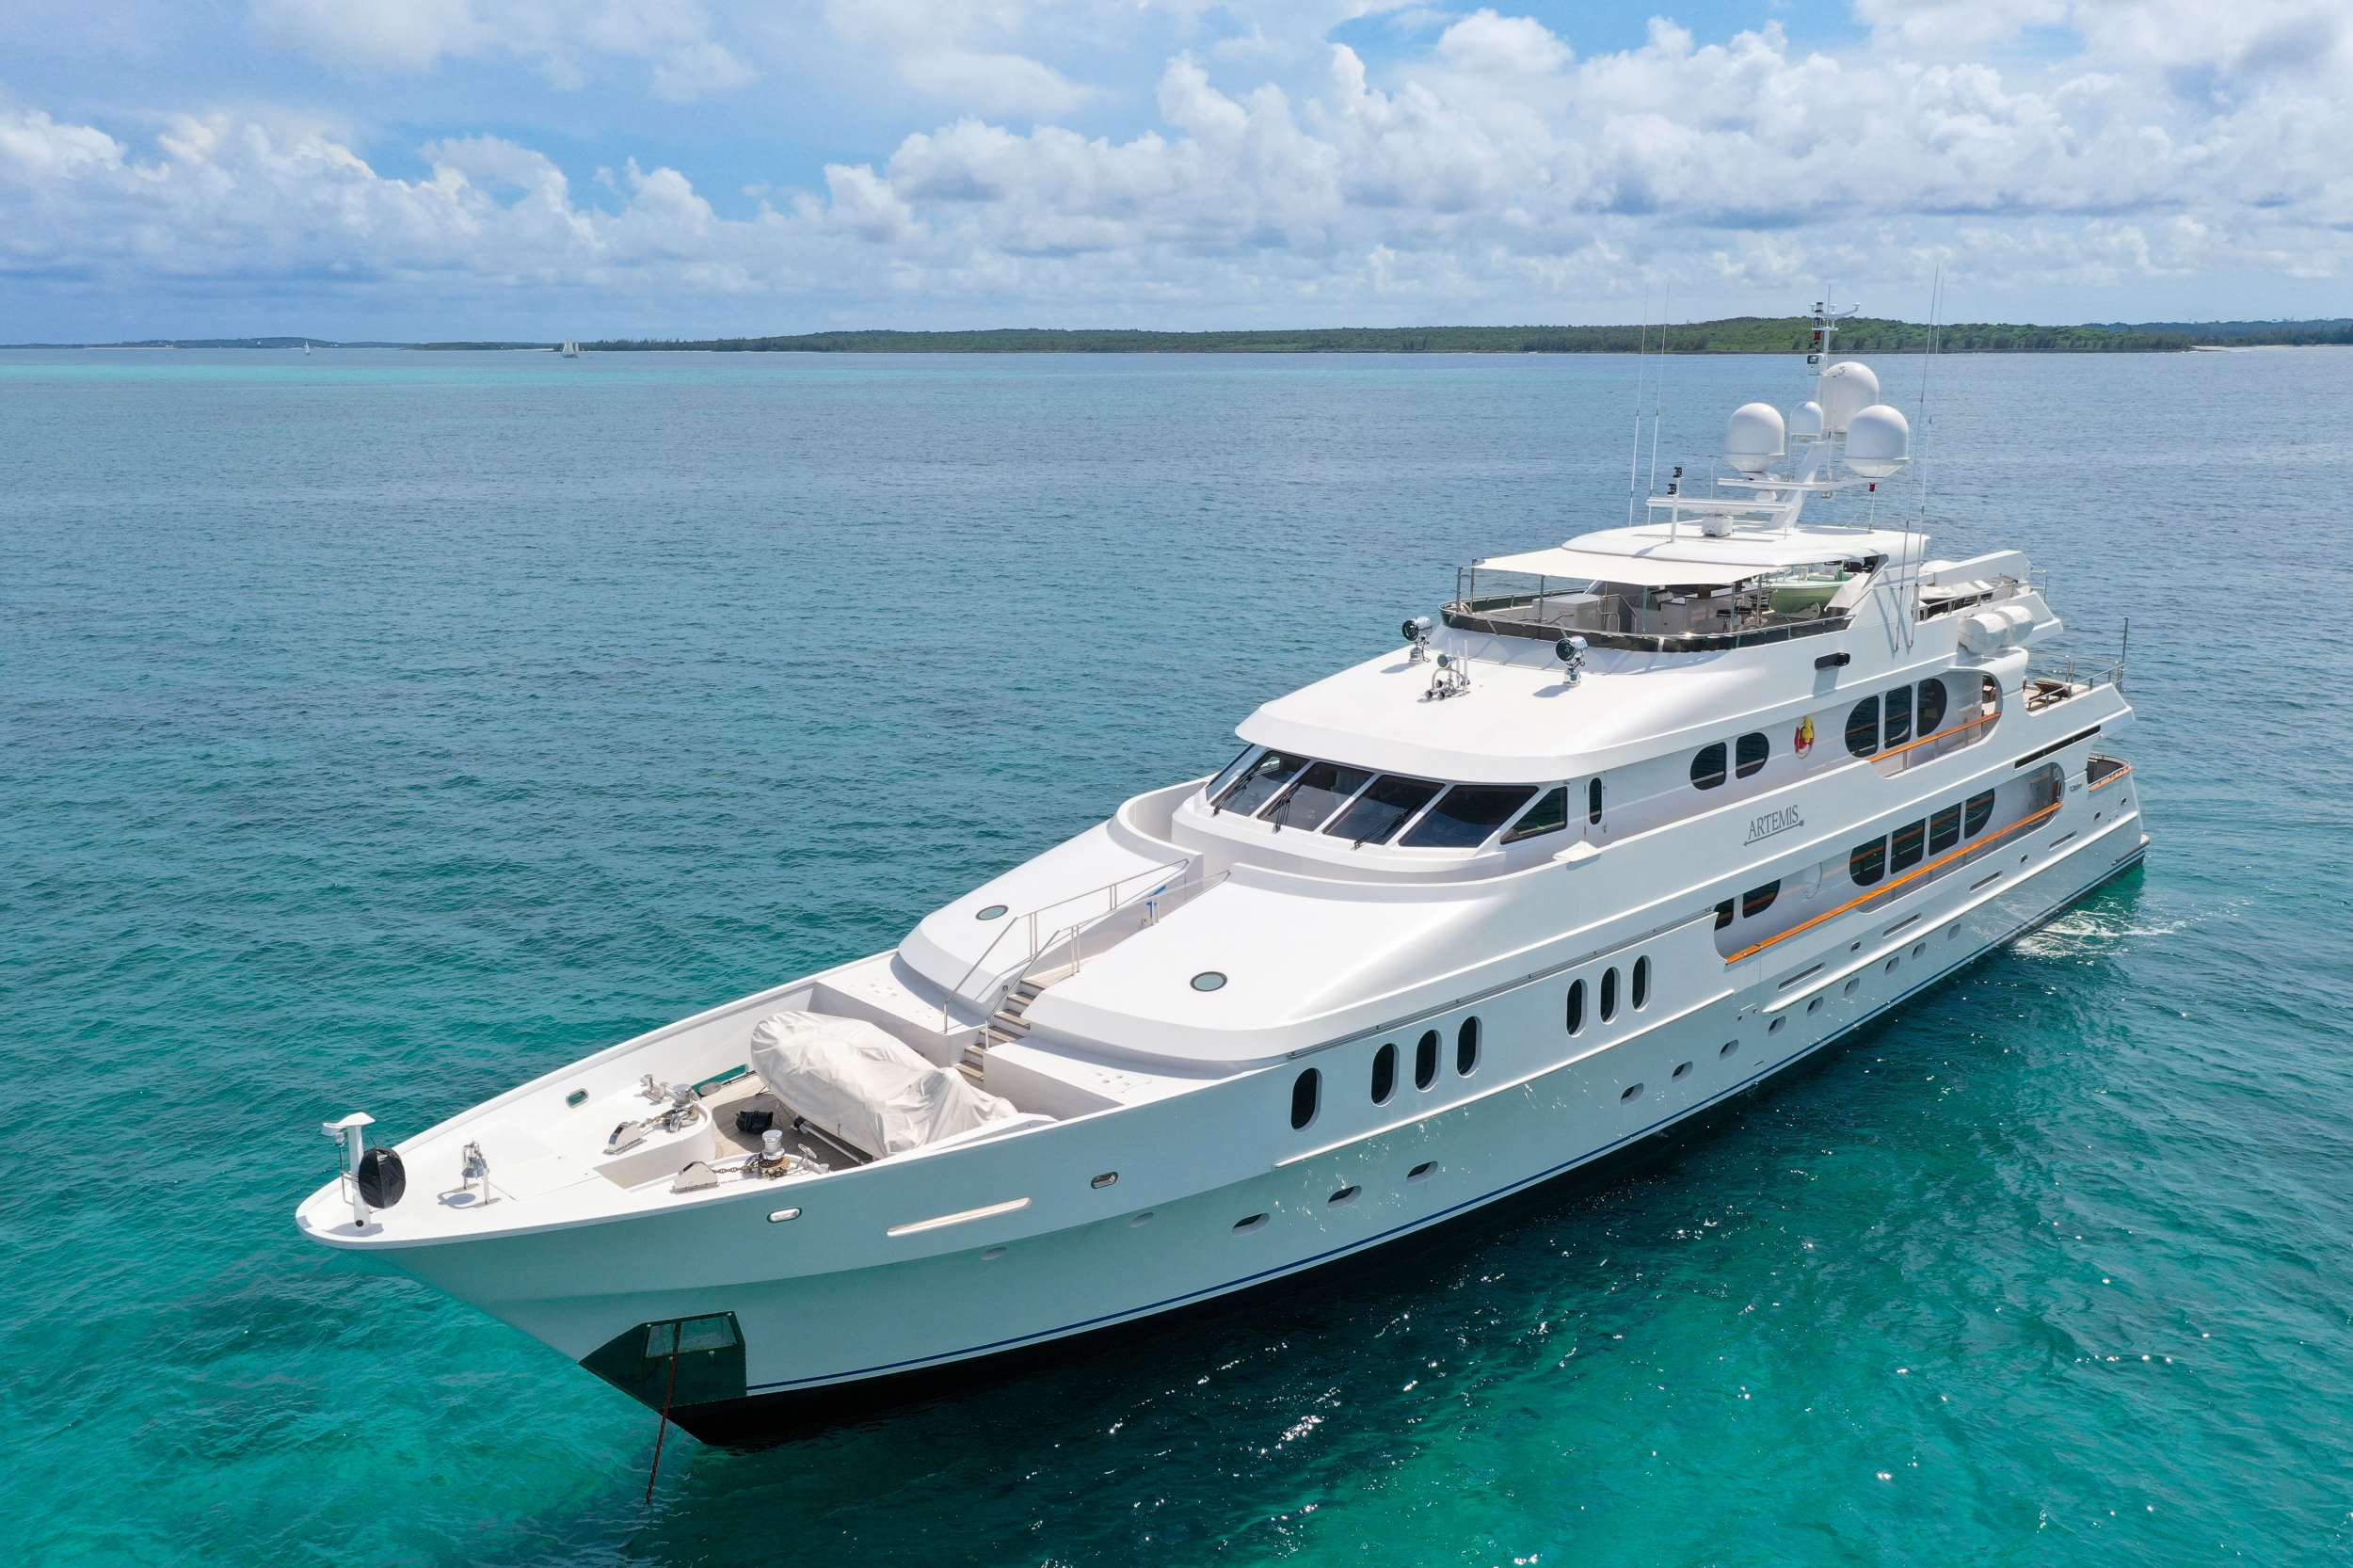 ARTEMIS - Yacht Charter Guadeloupe & Boat hire in Bahamas & Caribbean 1